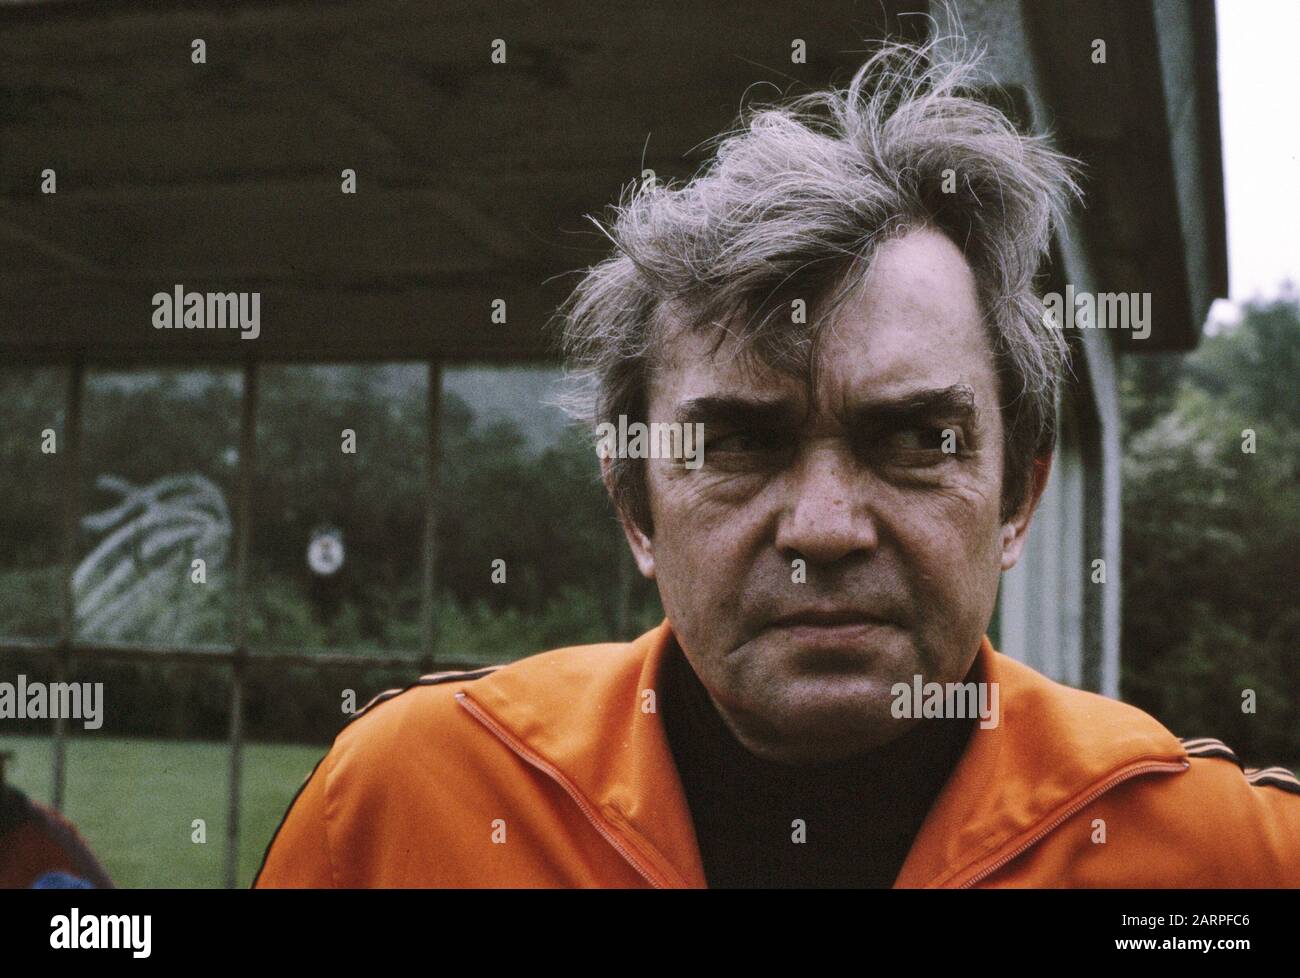 Trainer of the selection for the World Football Championships in Argentina. Ernst Happel. Date: May 1978 Location: Argentina Keywords: sport, trainers, football Personal name: Happel Ernst Stock Photo